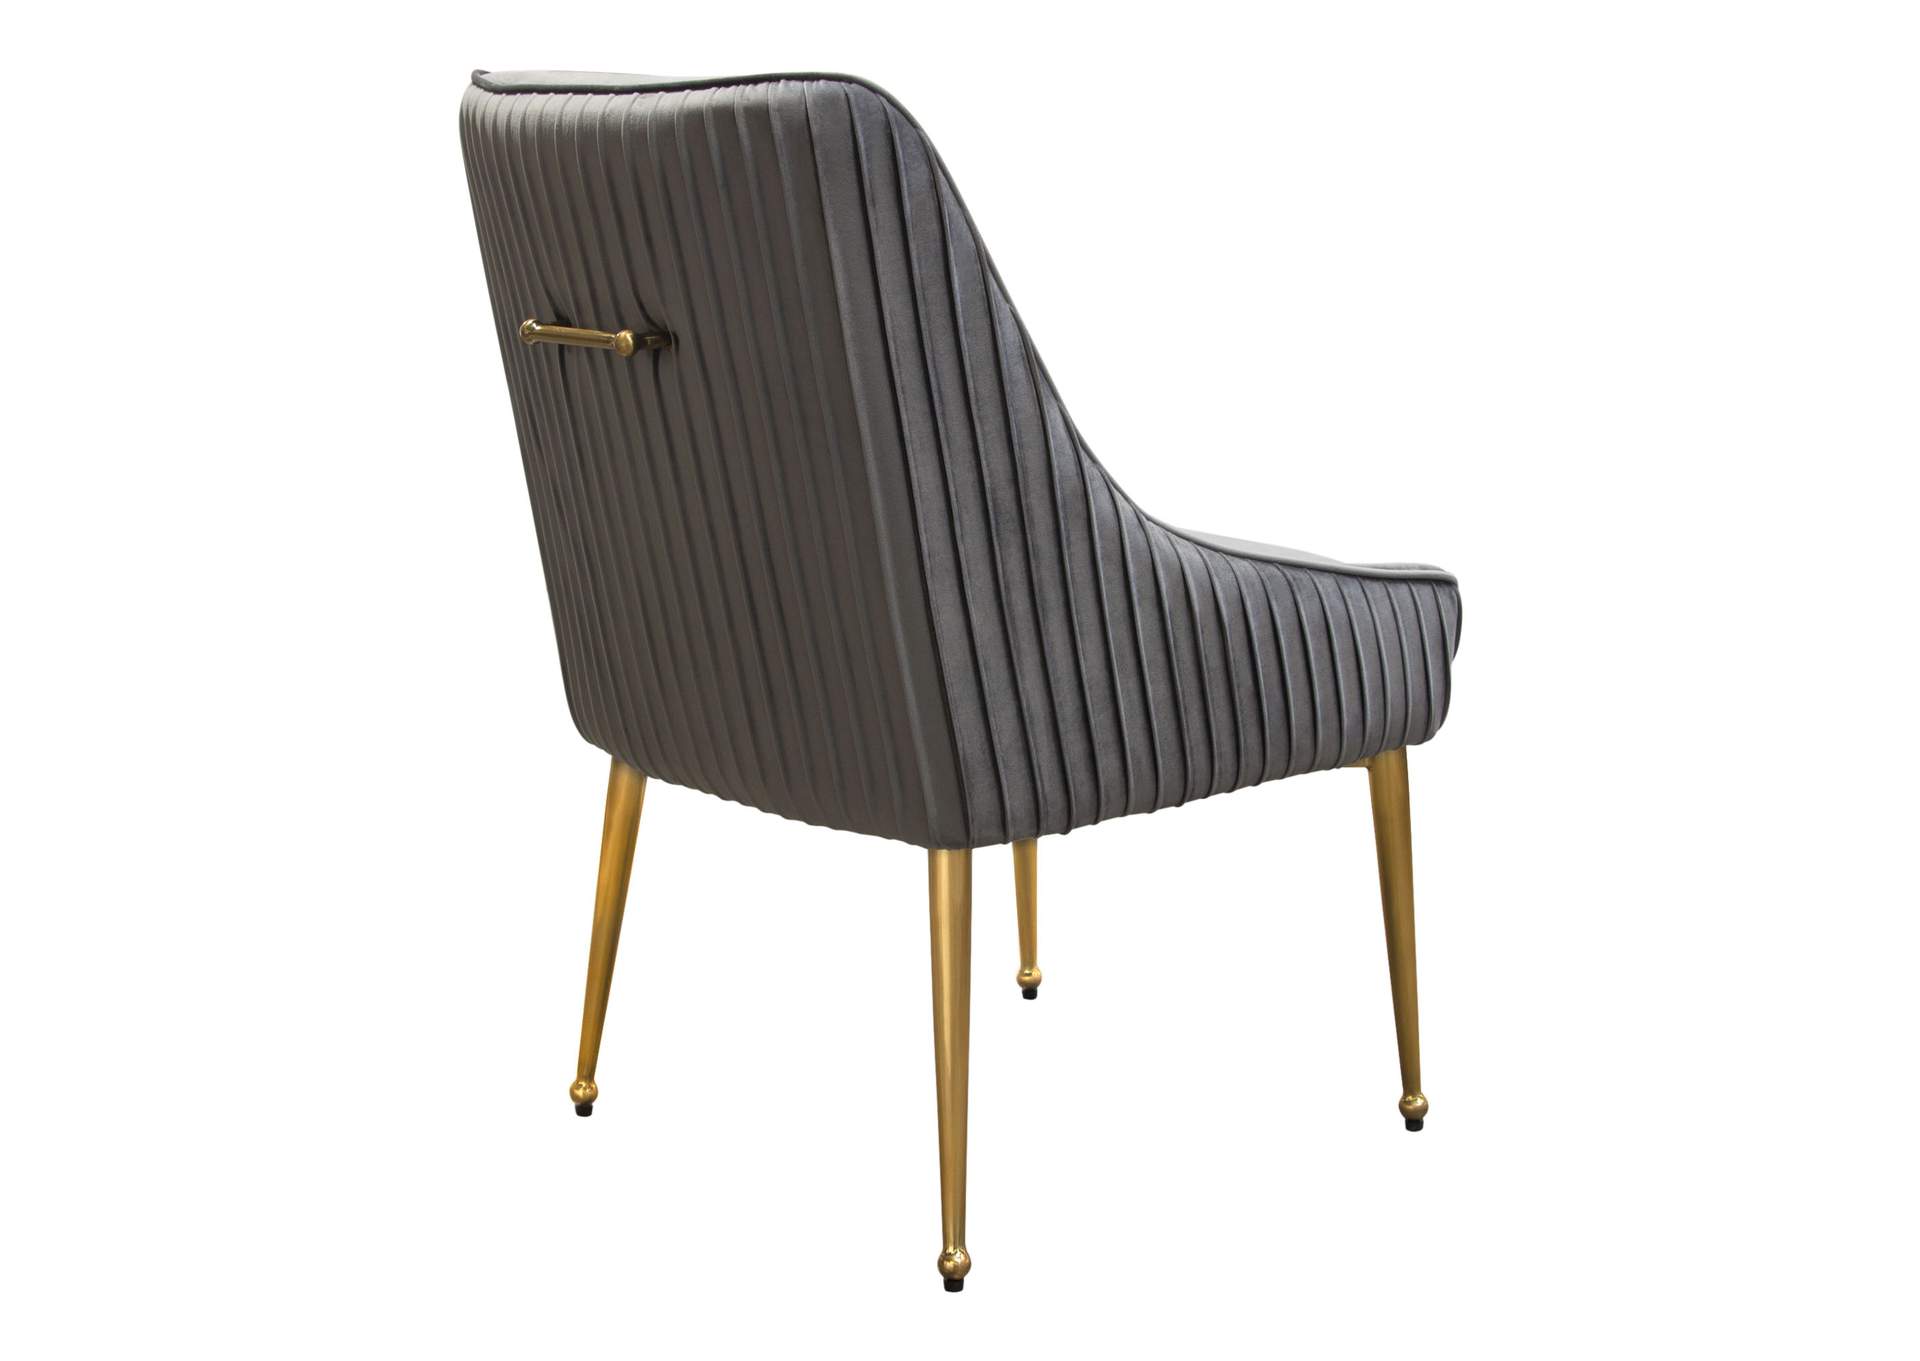 Set of (2) Quinn Dining Chairs w/ Vertical Outside Pleat Detail and Contoured Arm in Grey Velvet w/ Brushed Gold Metal Leg by Diamond Sofa,Diamond Sofa